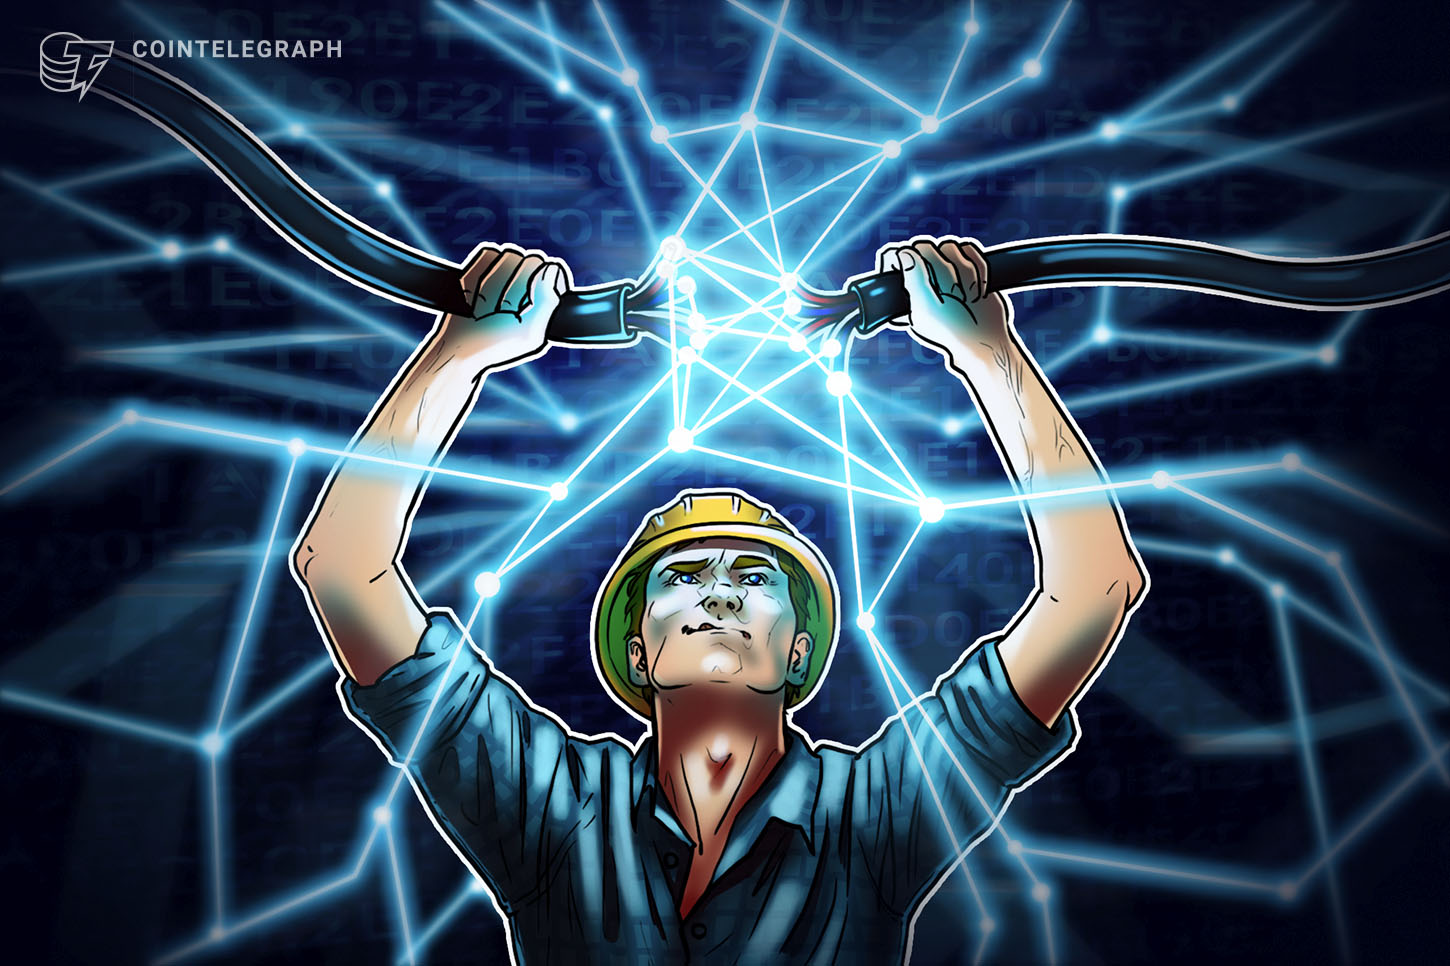 ‘We’re getting paid to provide Bitcoins’ reveals Texas BTC miner